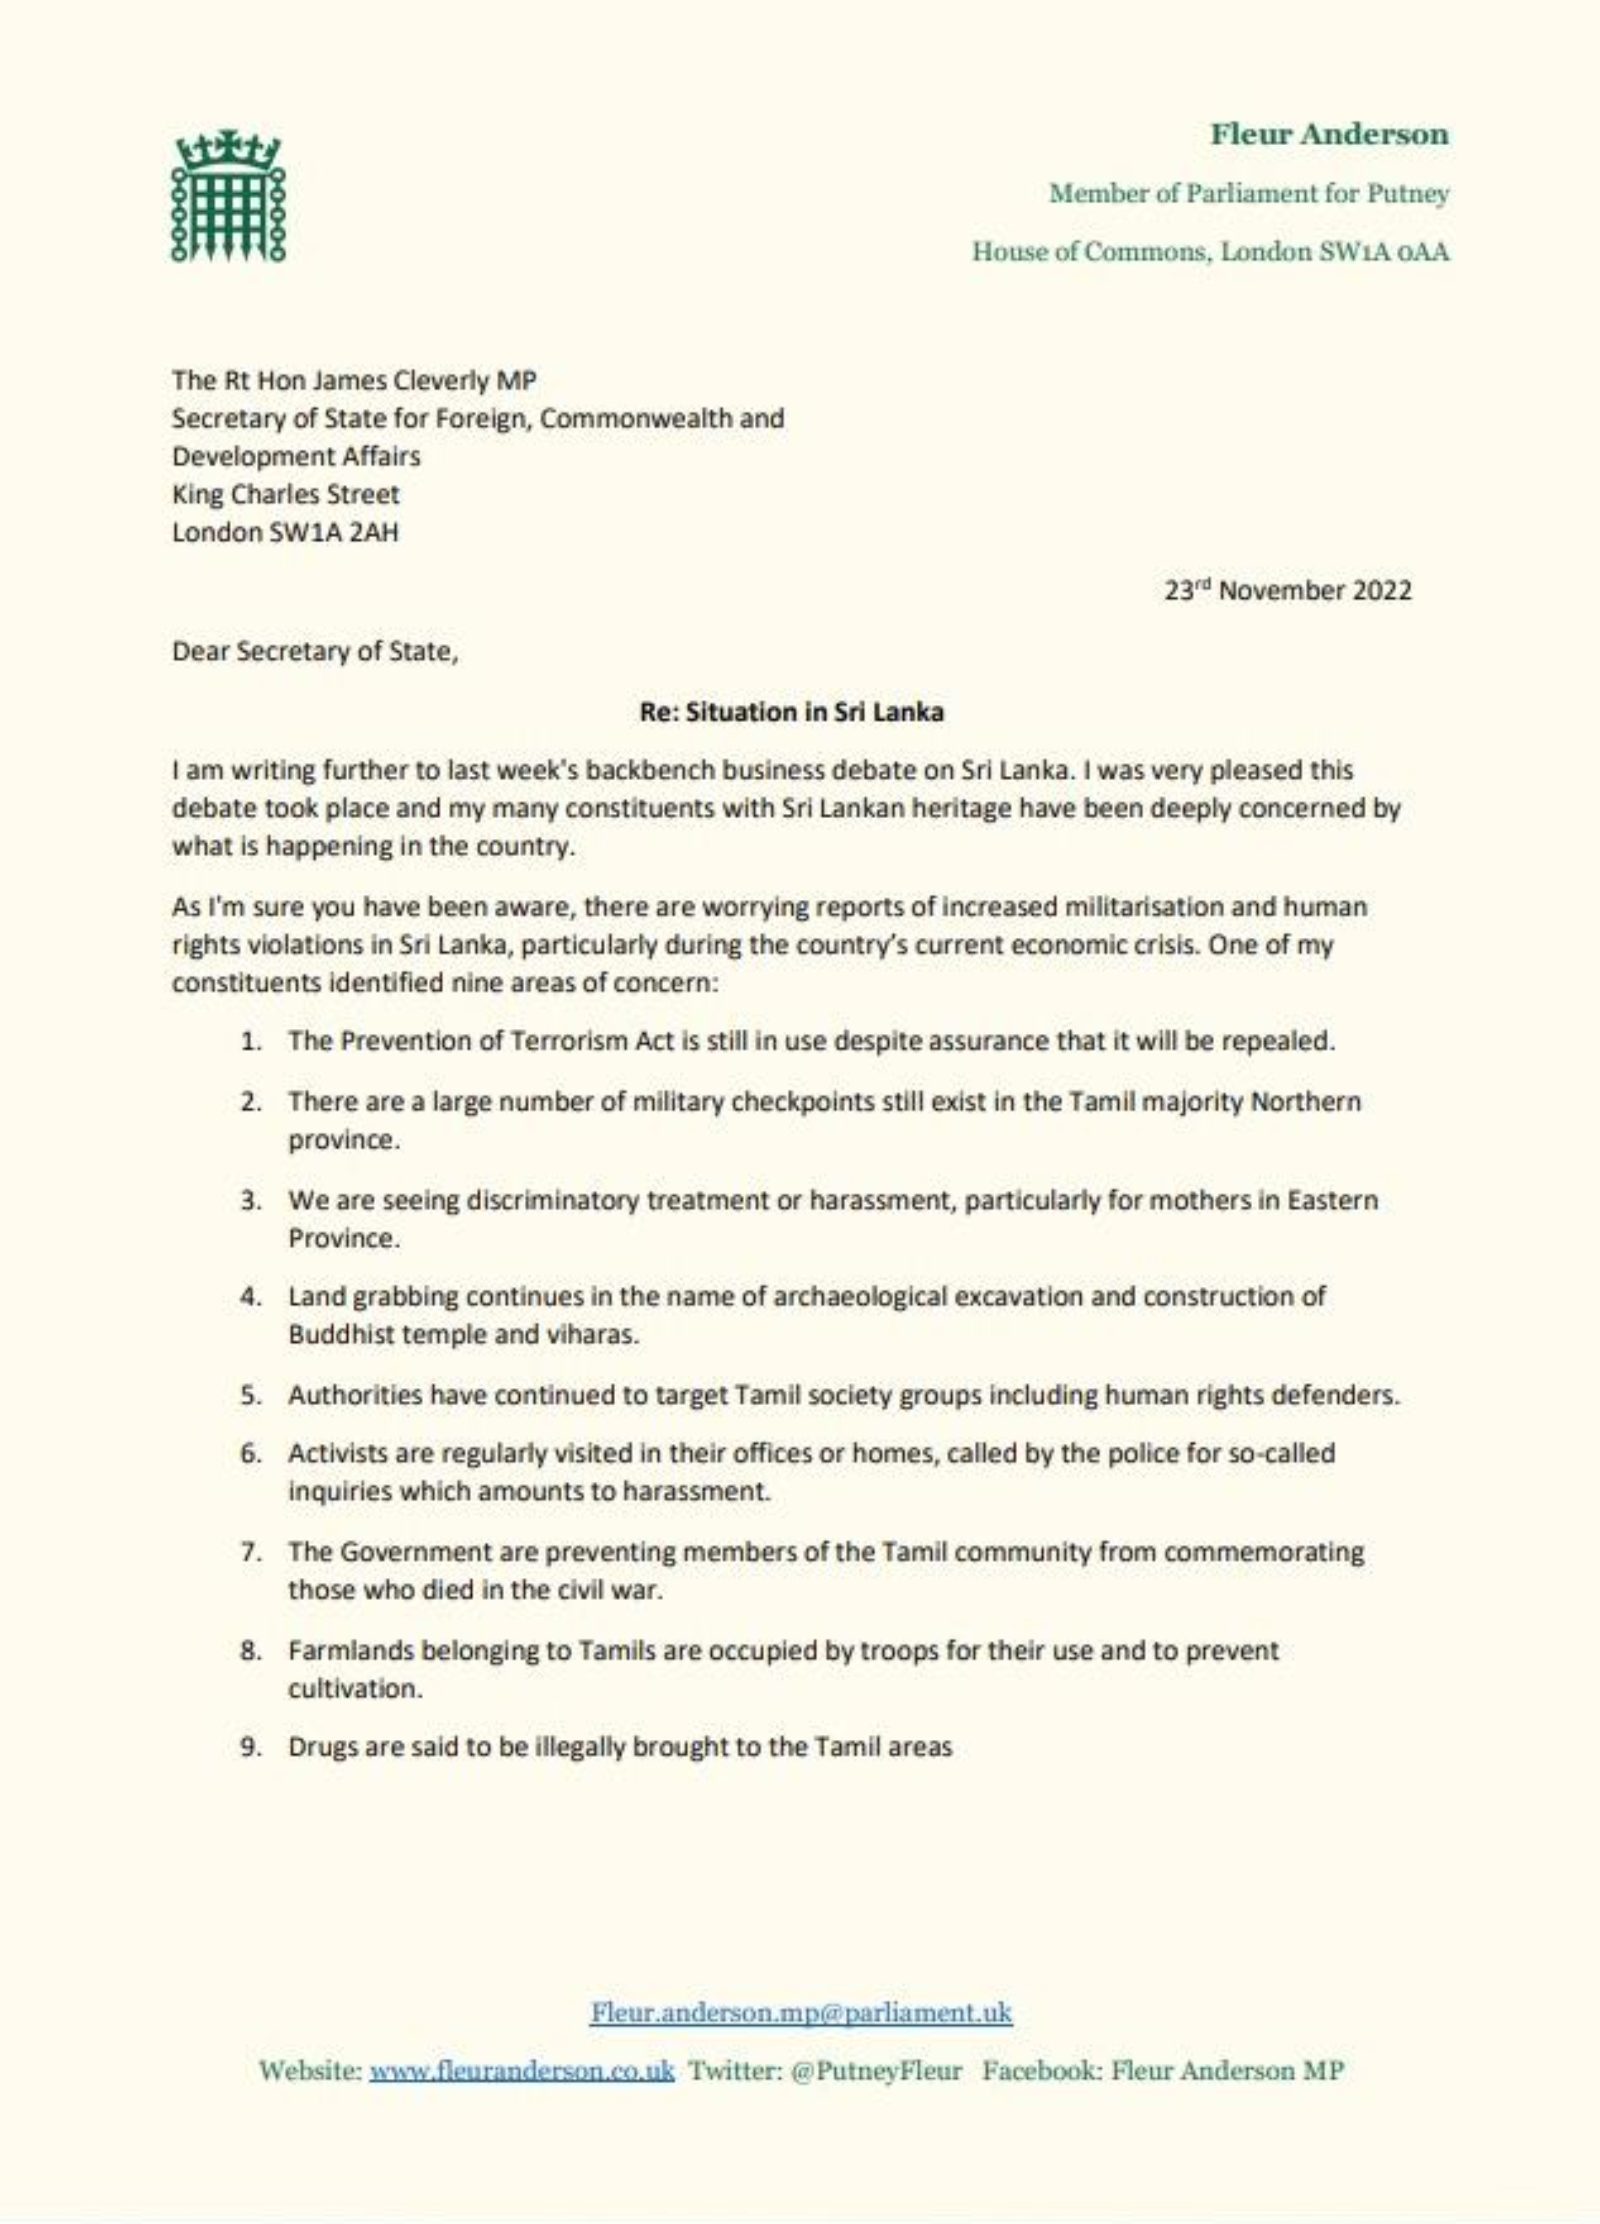 Letter from Fleur Anderson MP regarding situation in Sri Lanka p.1